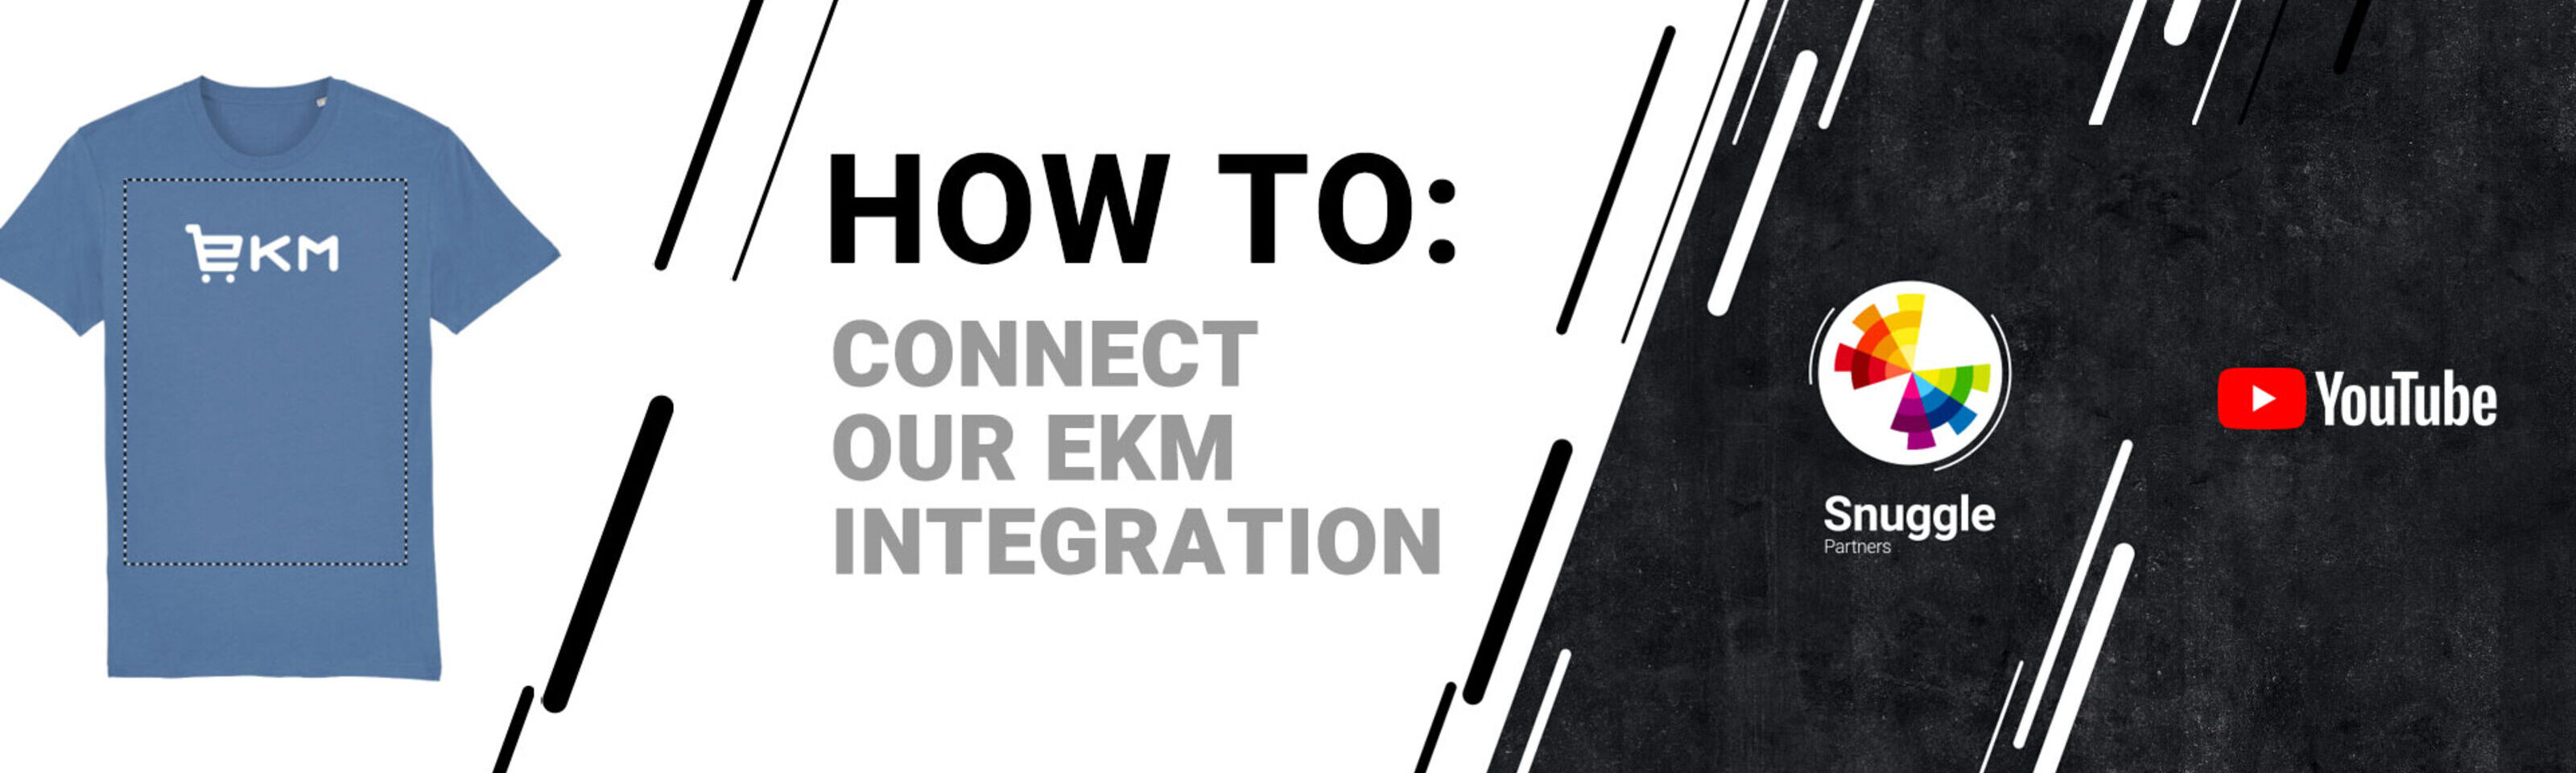 HOW TO: Connect Our EKM Integration